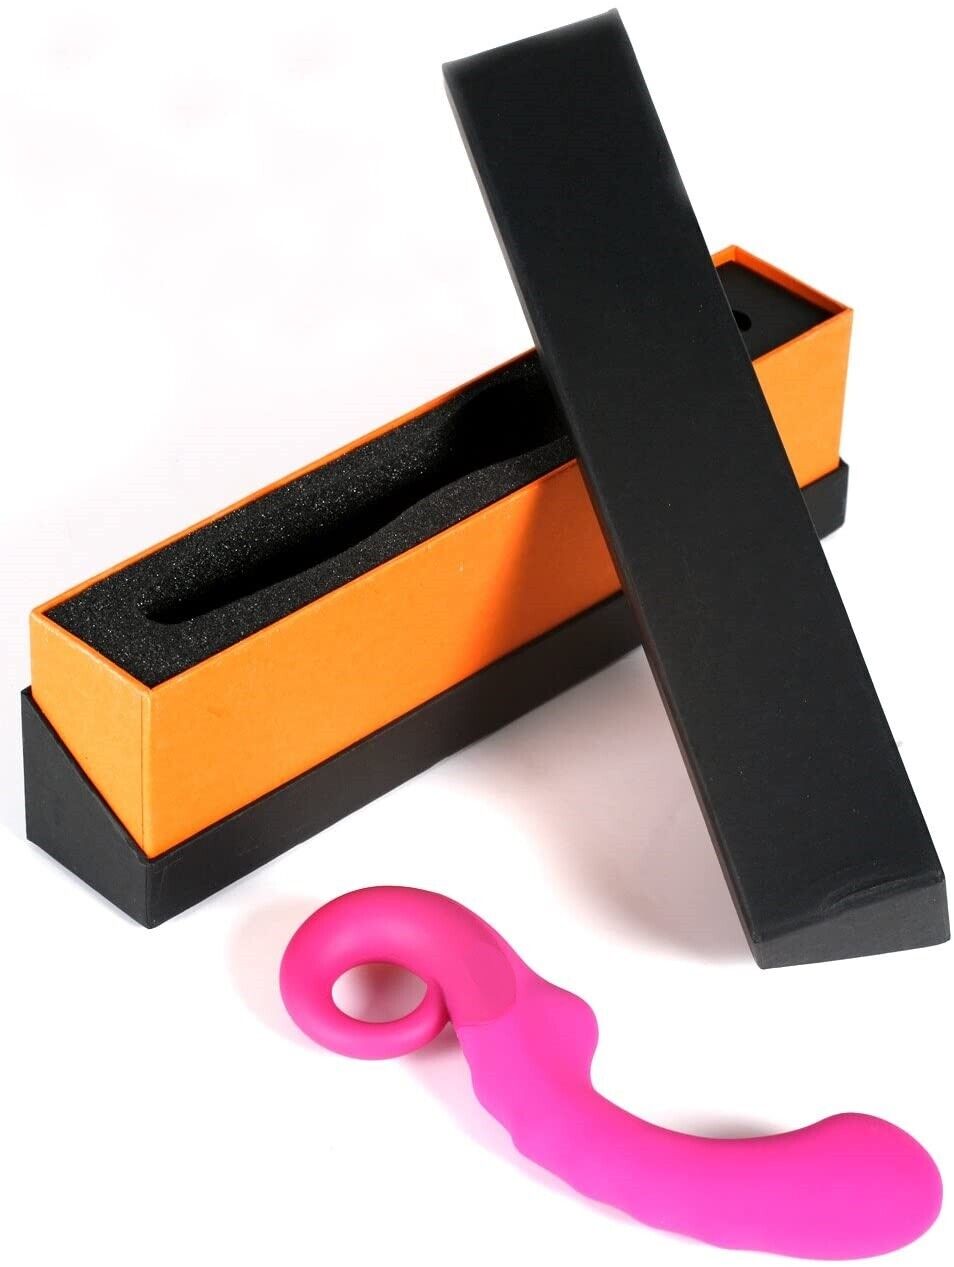 Odeco Hedone Silicone Vibrator – Rose Rechargeable G-Spot Vibrator Sex Toy